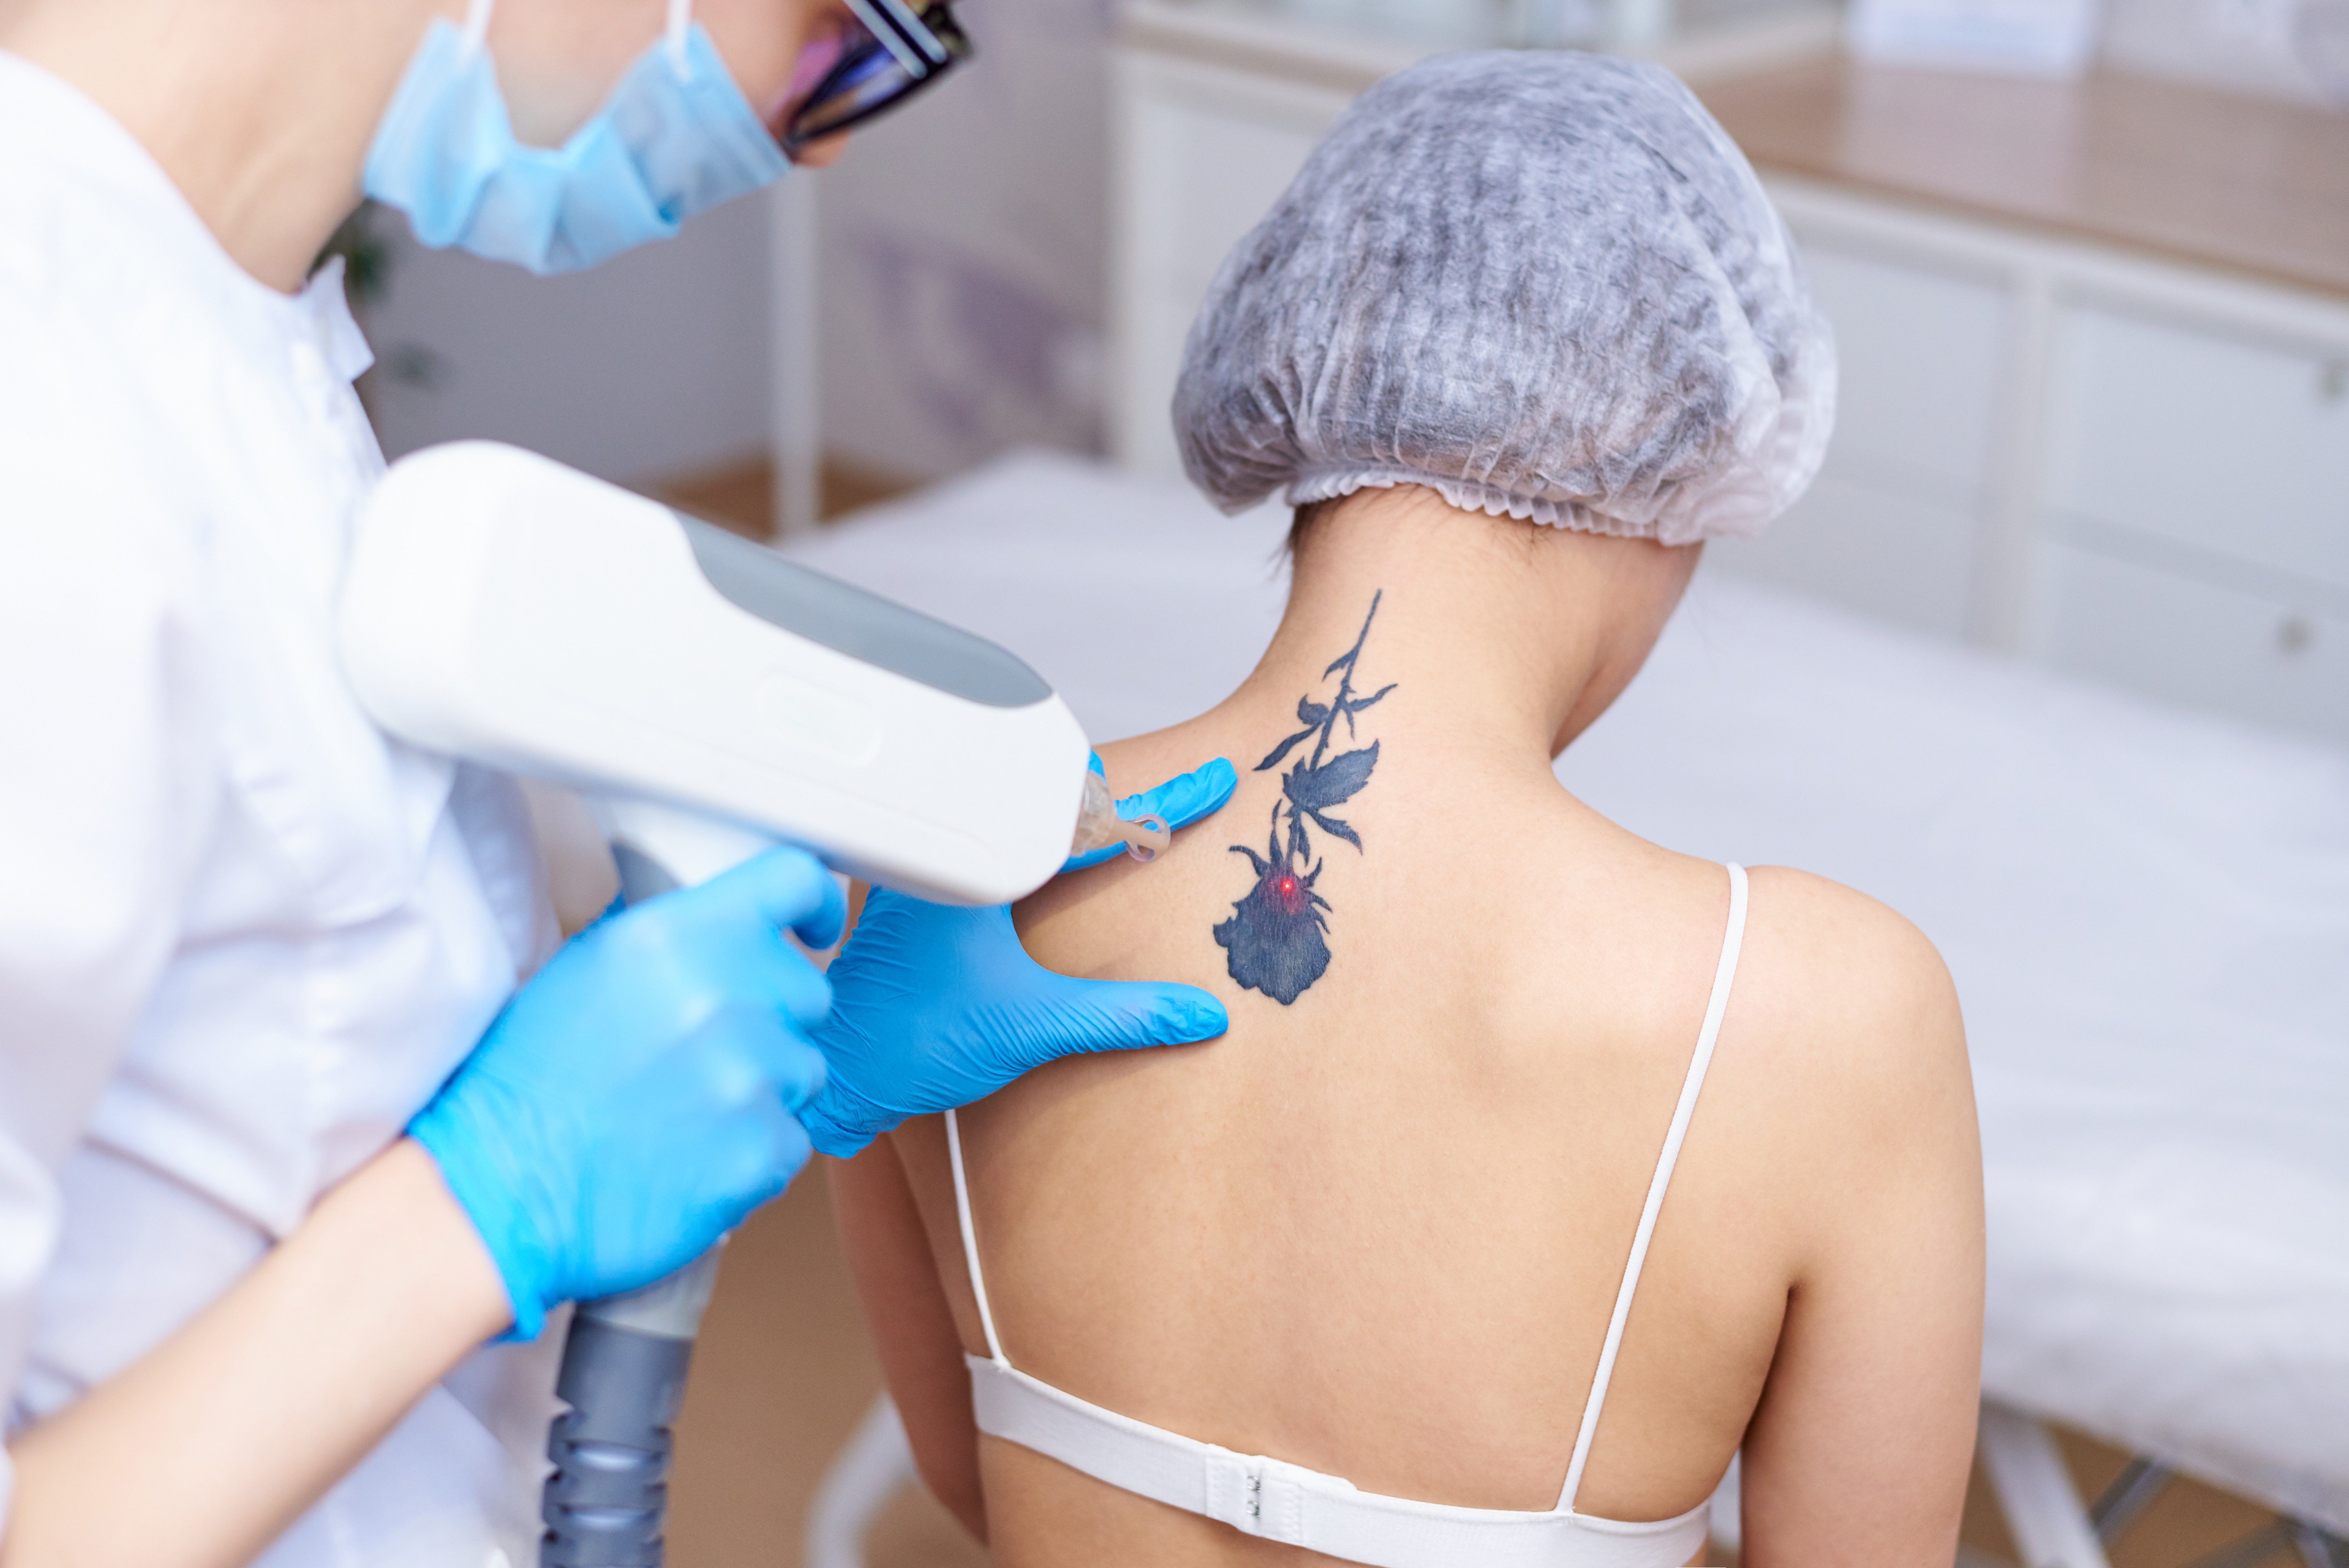 10 Interesting Facts About Laser Tattoo Removal